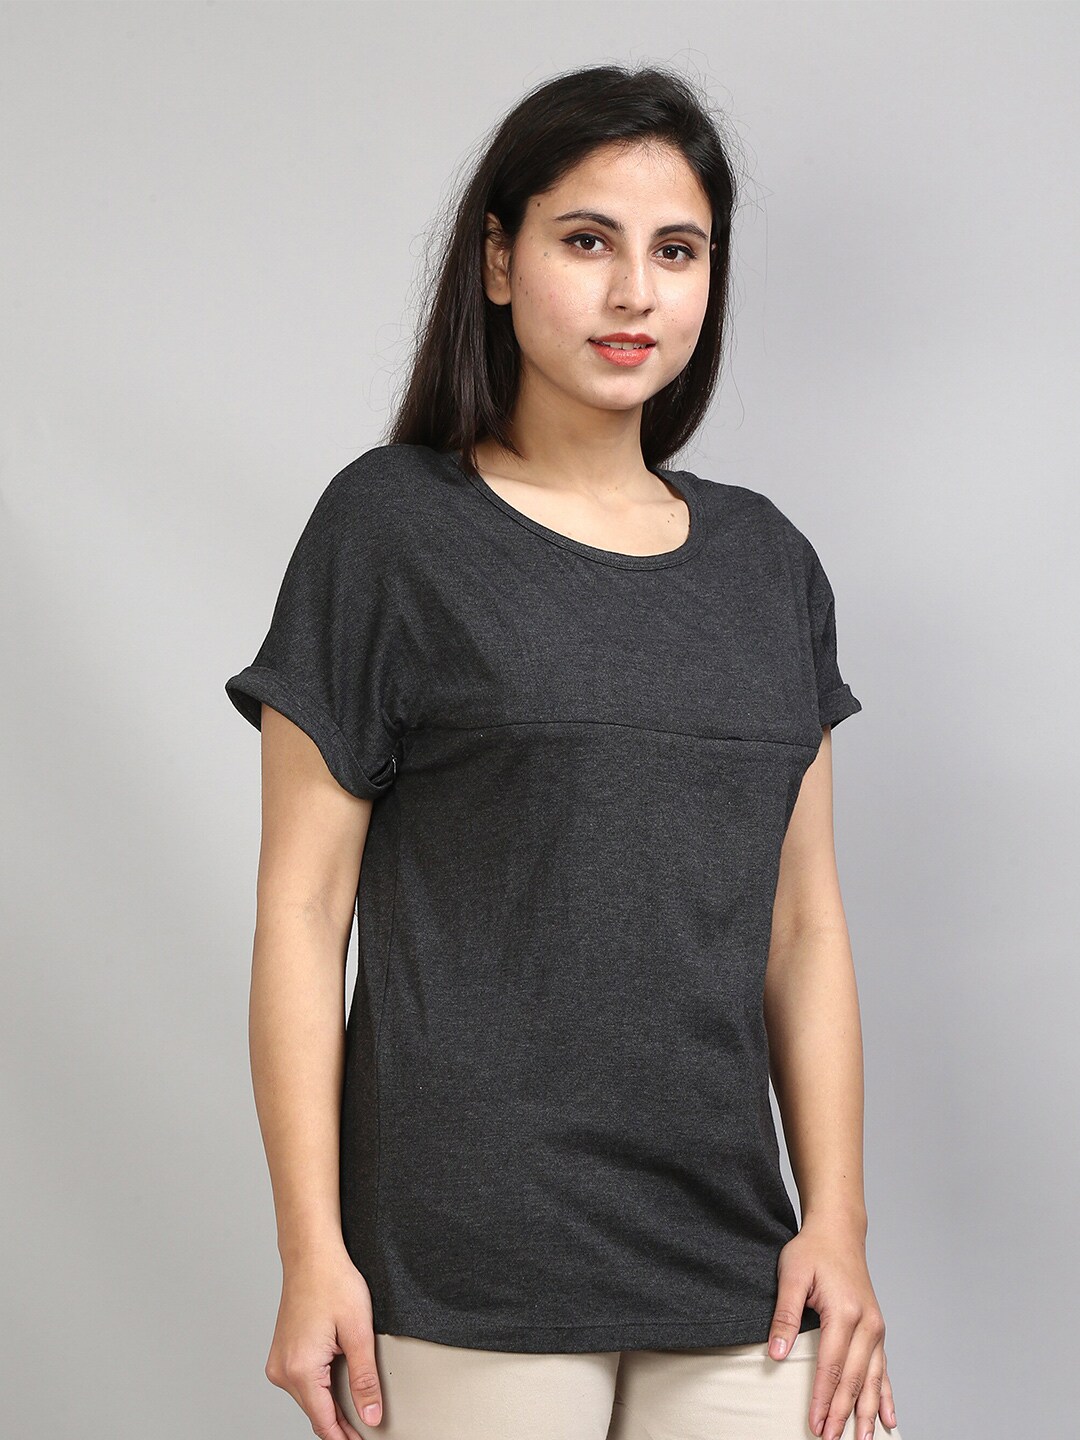 SillyBoom Round Neck Extended Sleeve Maternity T-shirt Price in India